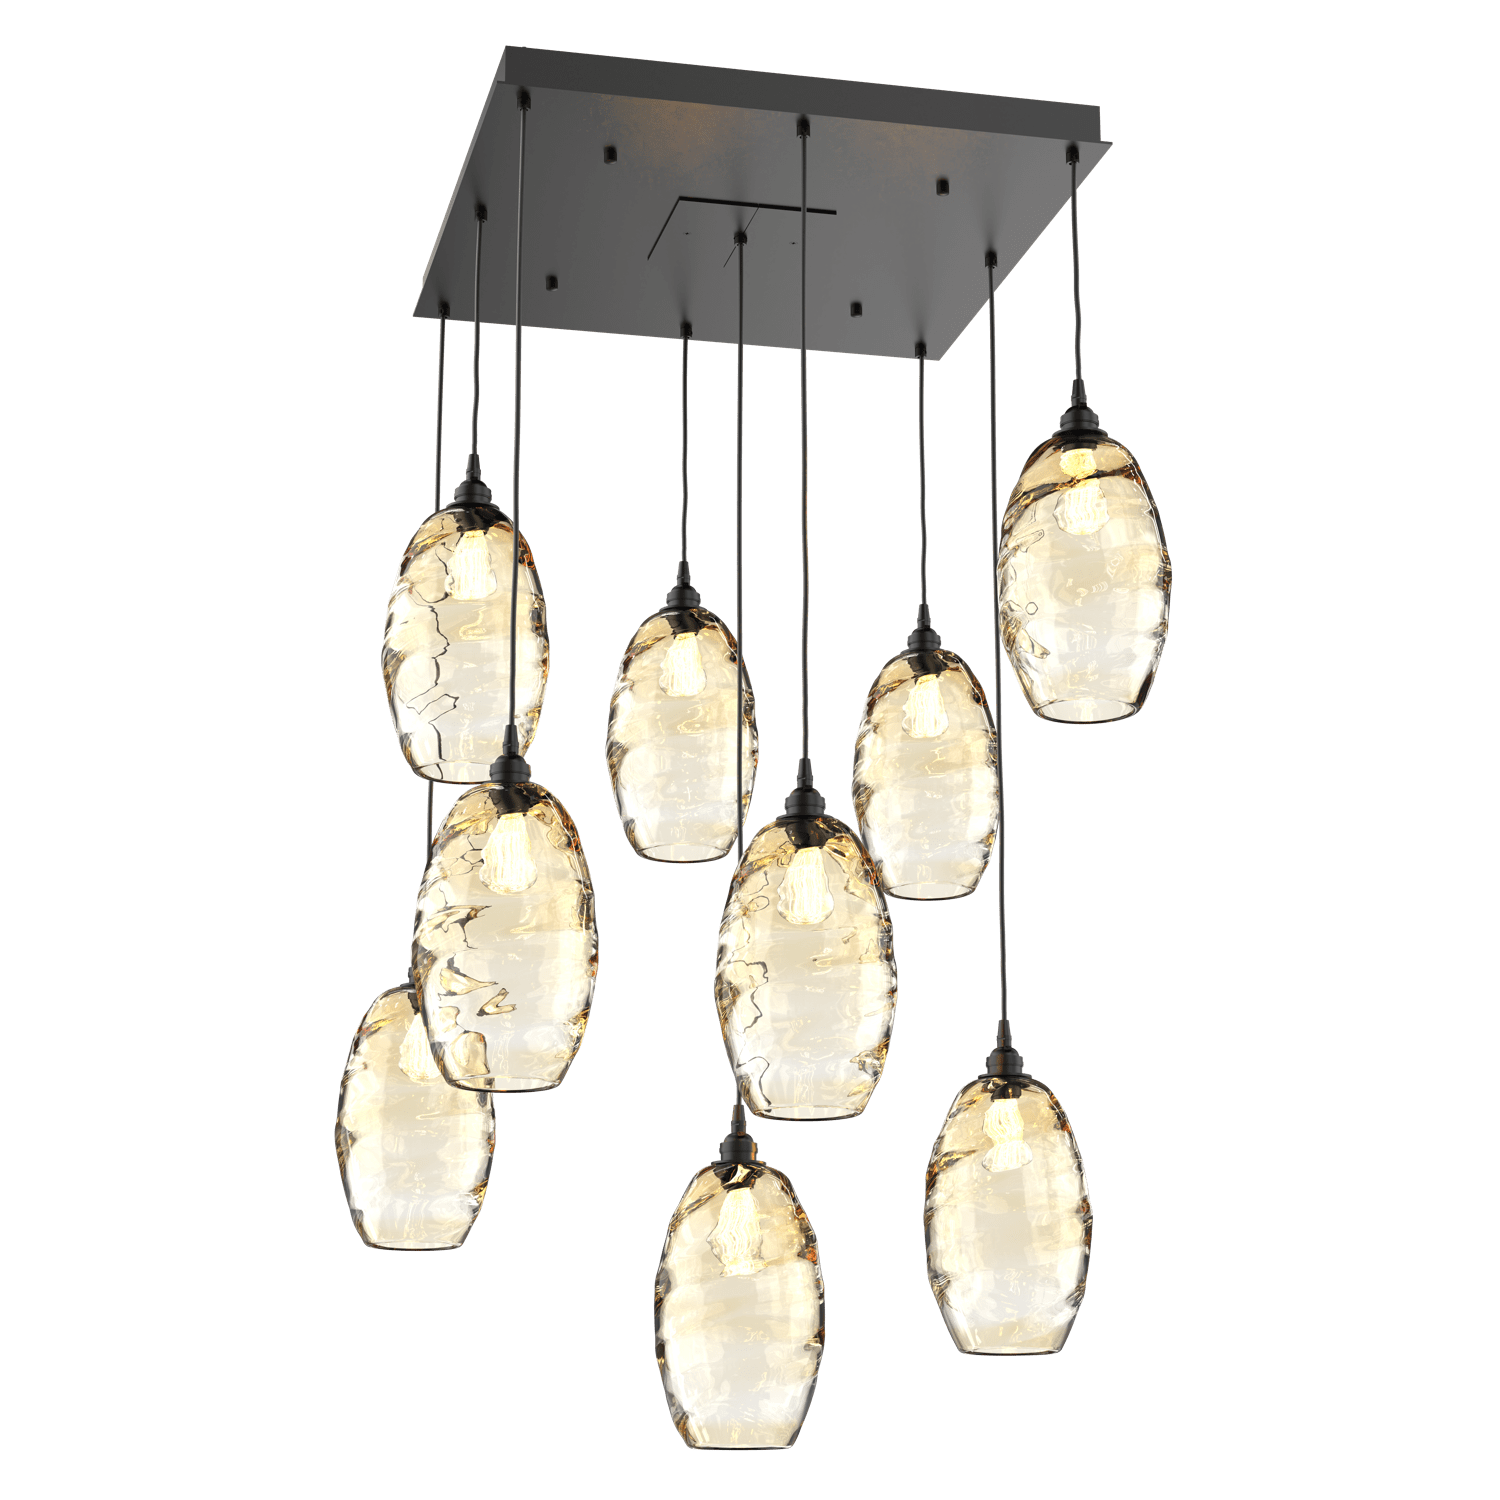 CHB0035-09-MB-OA-Hammerton-Studio-Optic-Blown-Glass-Elisse-9-light-square-pendant-chandelier-with-matte-black-finish-and-optic-amber-blown-glass-shades-and-incandescent-lamping